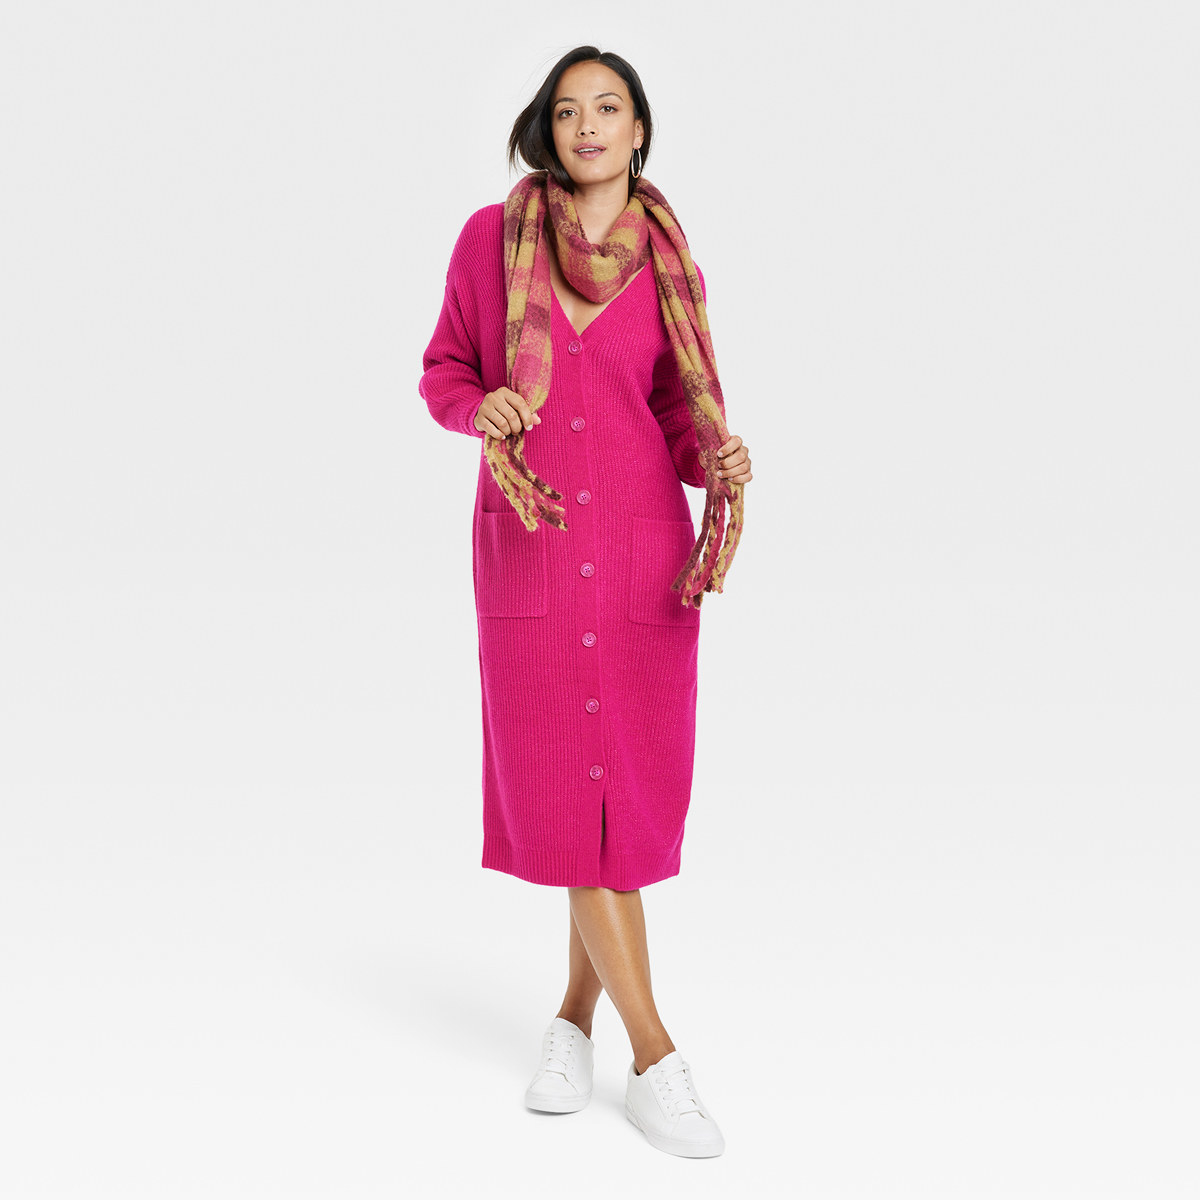 Smiling woman wear long pink sweater dresses paired with scarf and tennis shoes